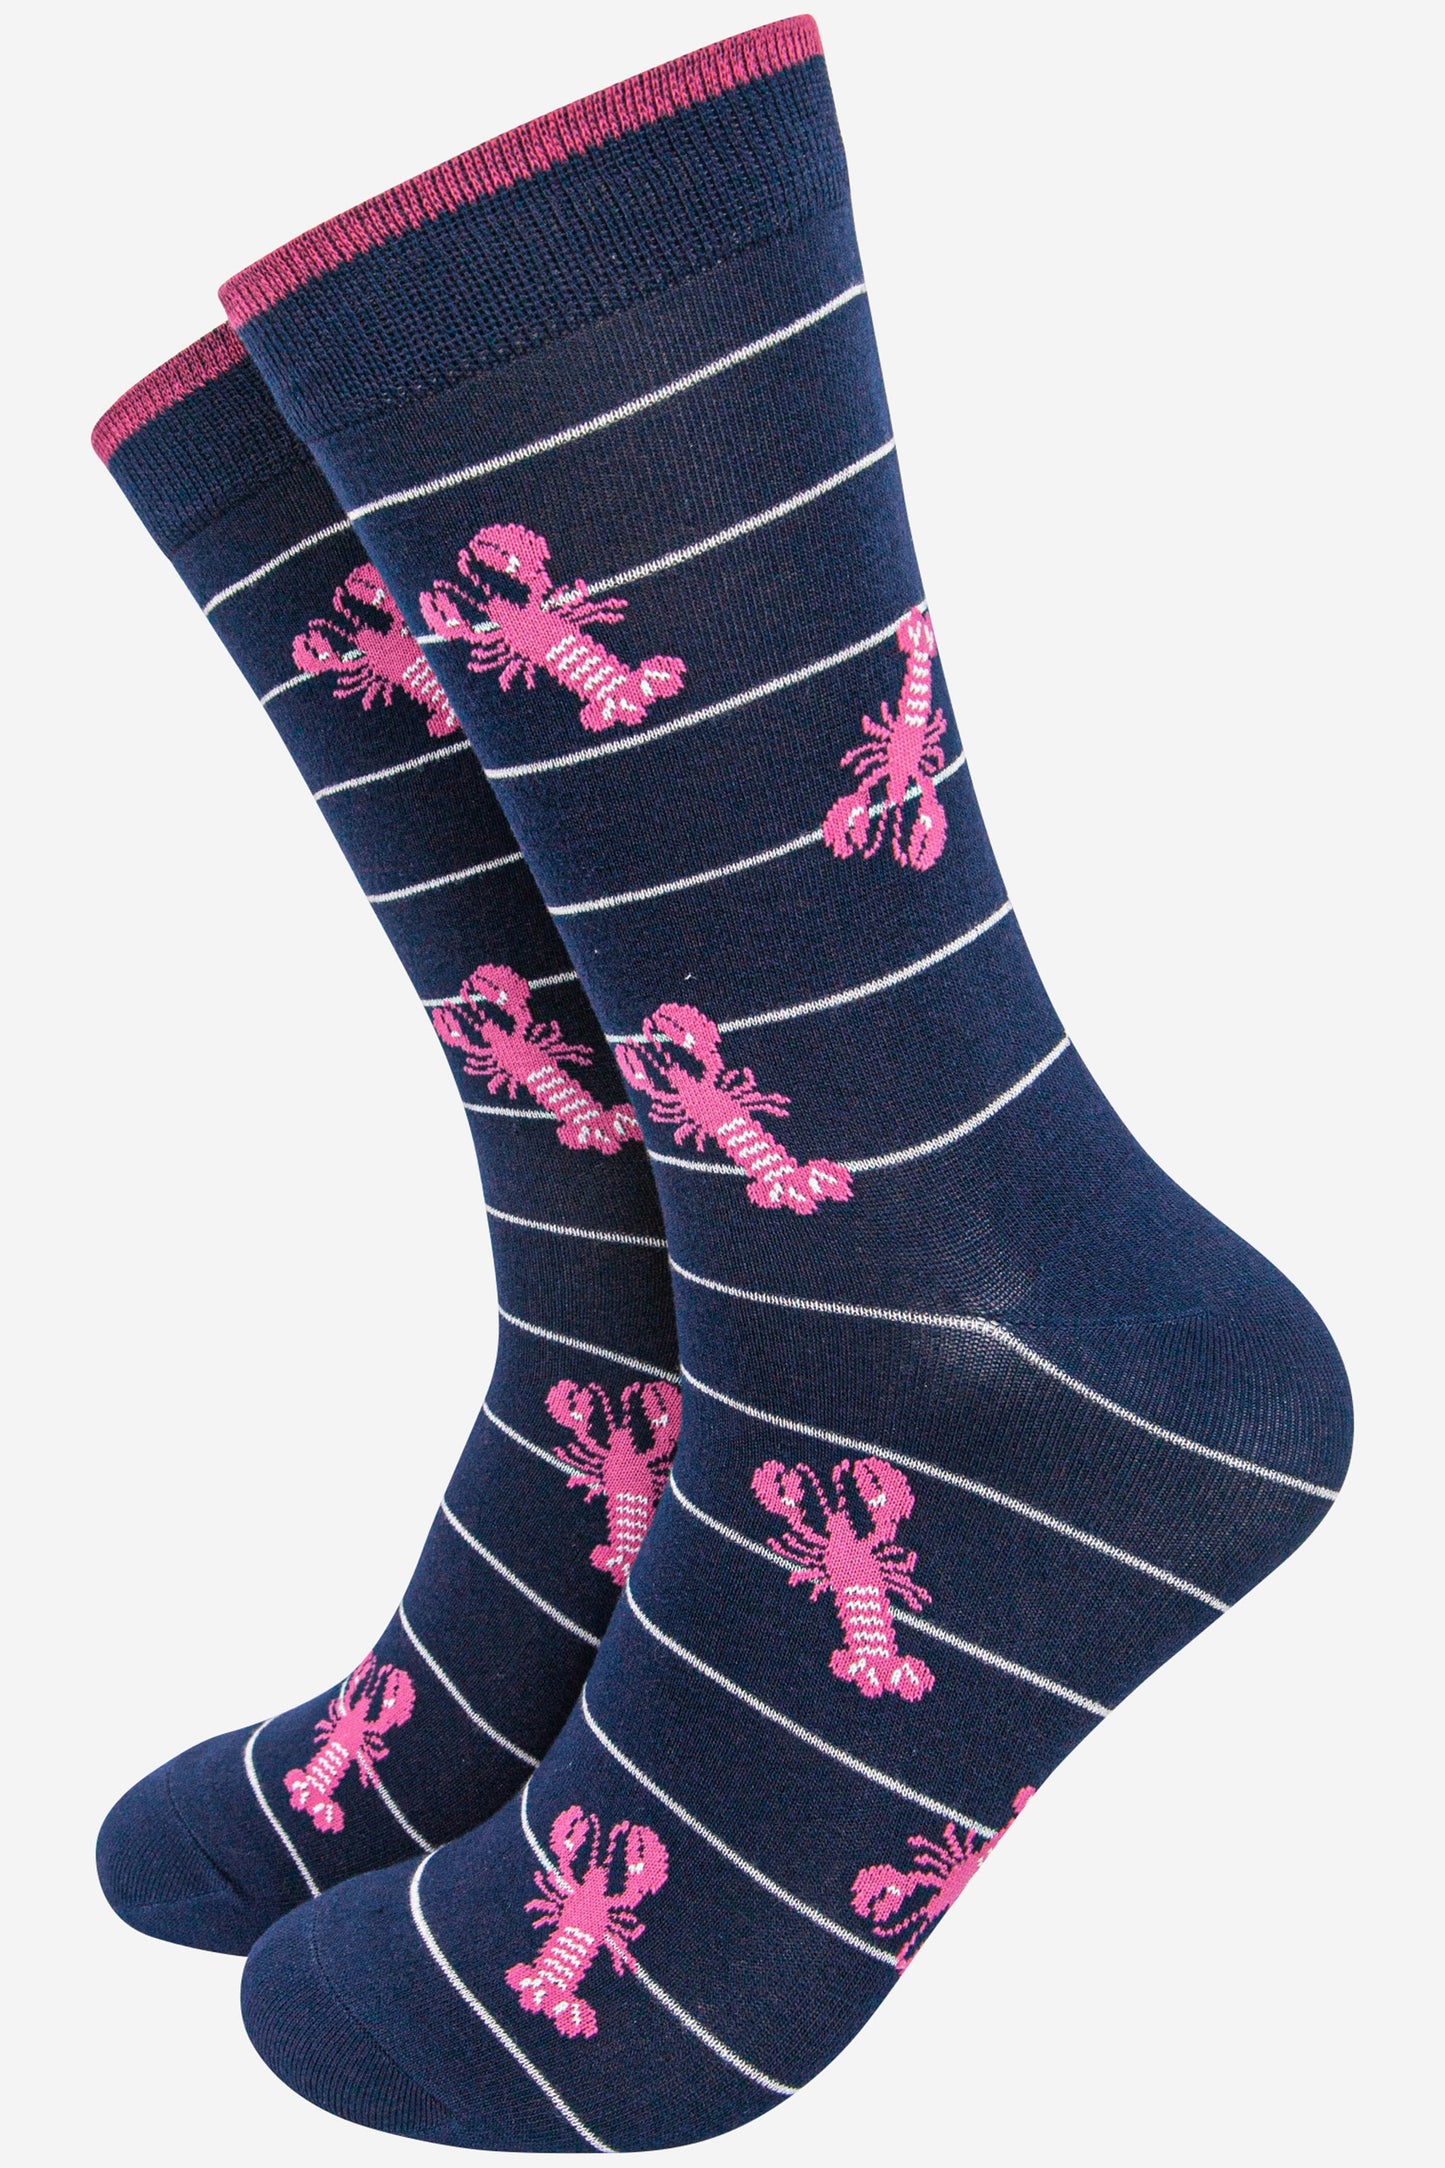 navy blue bamboo socks with a pattern of pink lobsters and a white horizonal pin stripe